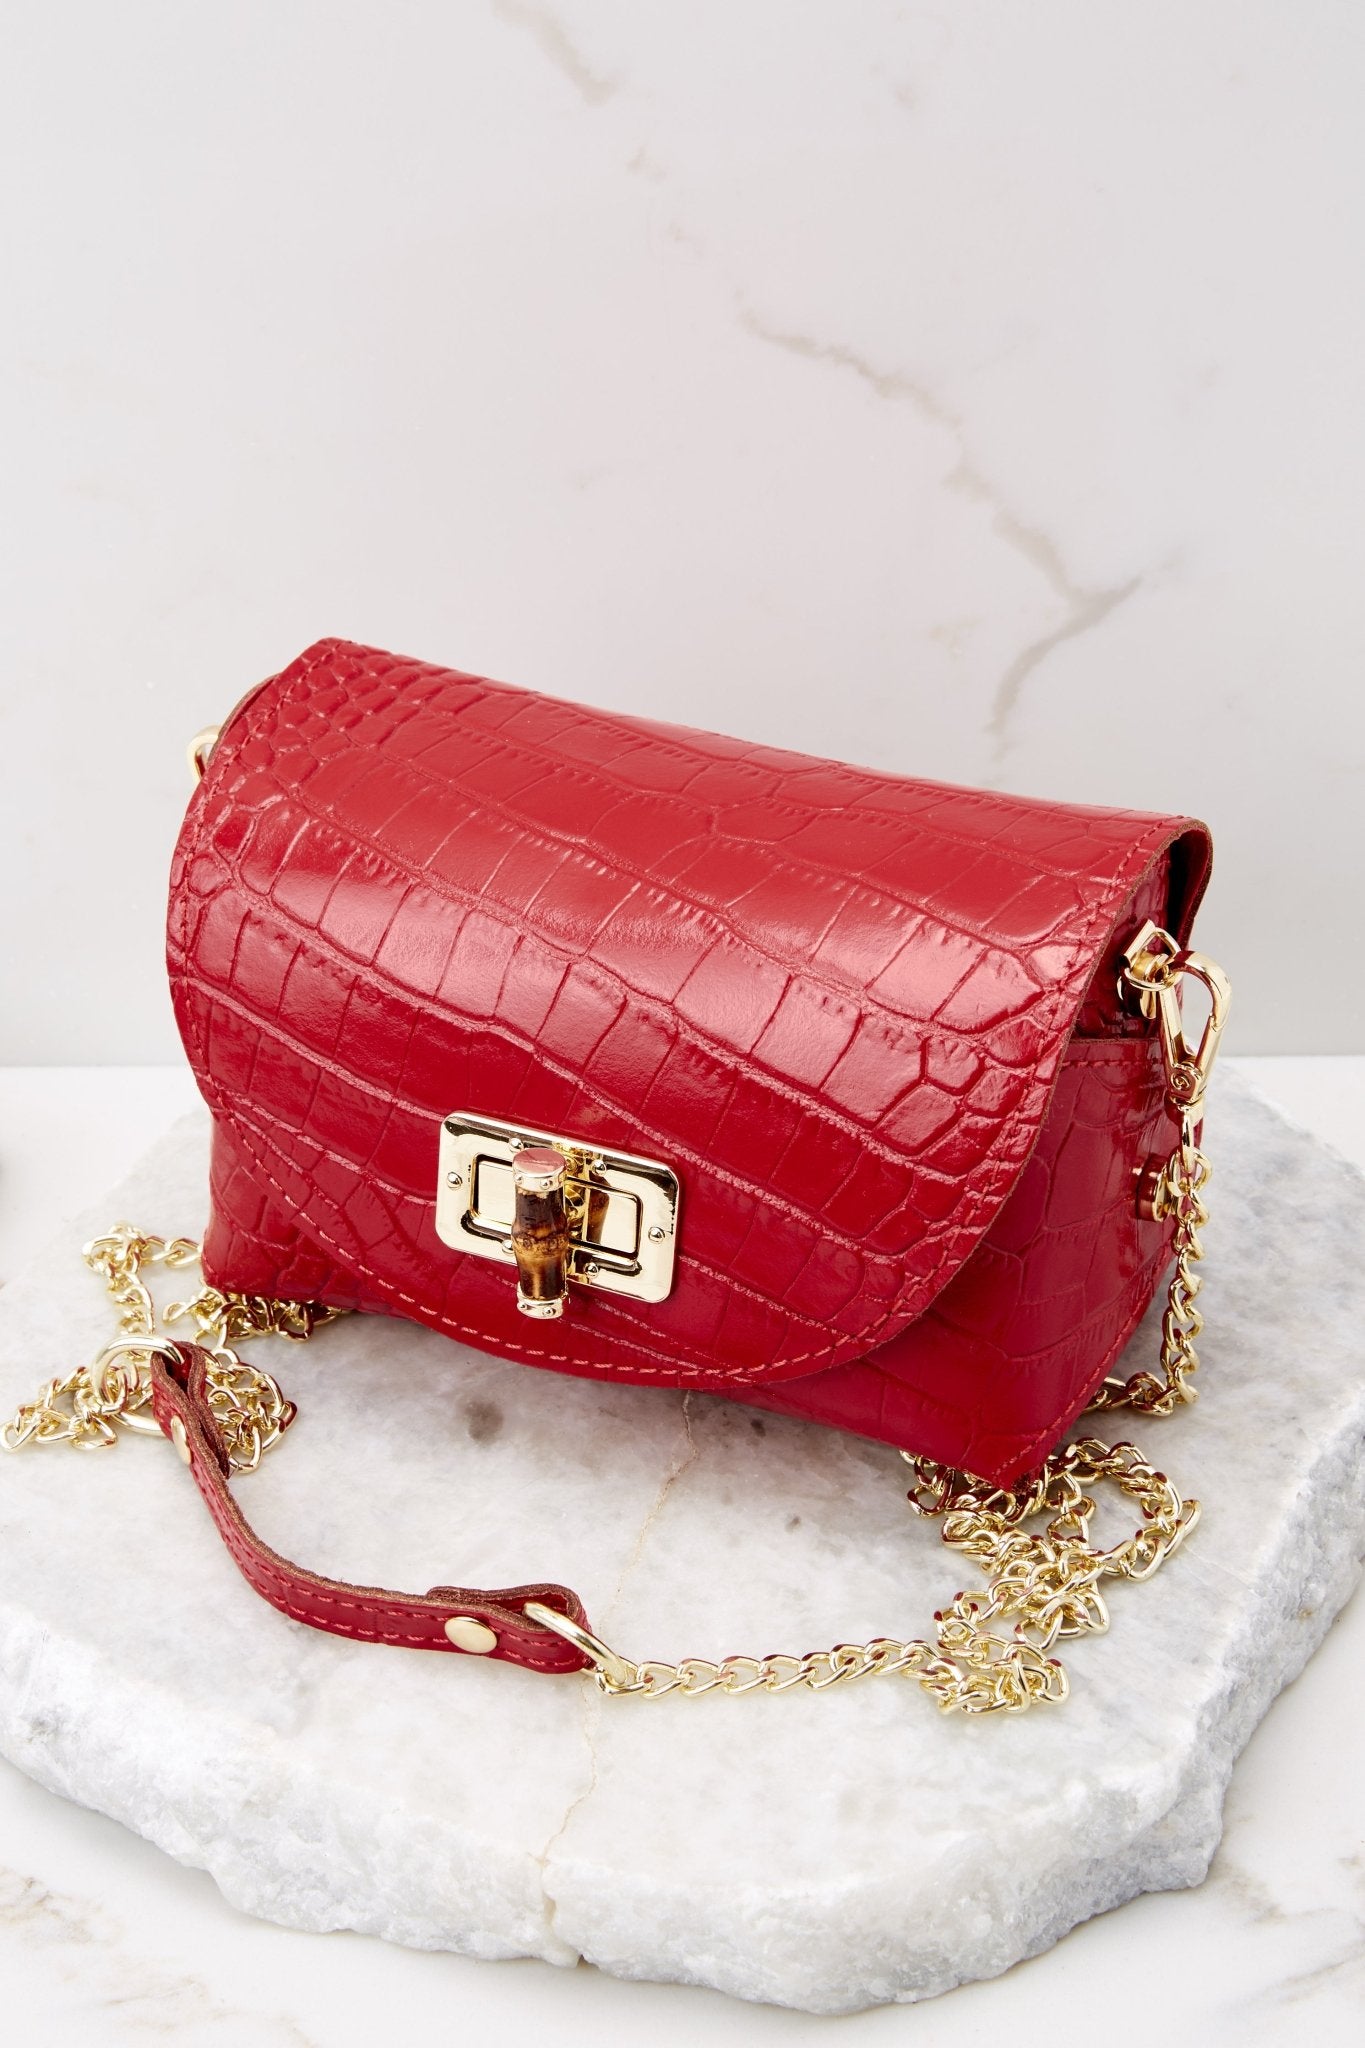 This red snake print bag features a leather body, gold-colored hardware, wooden turn-lock closure, detachable curb chain strap that drops 23".